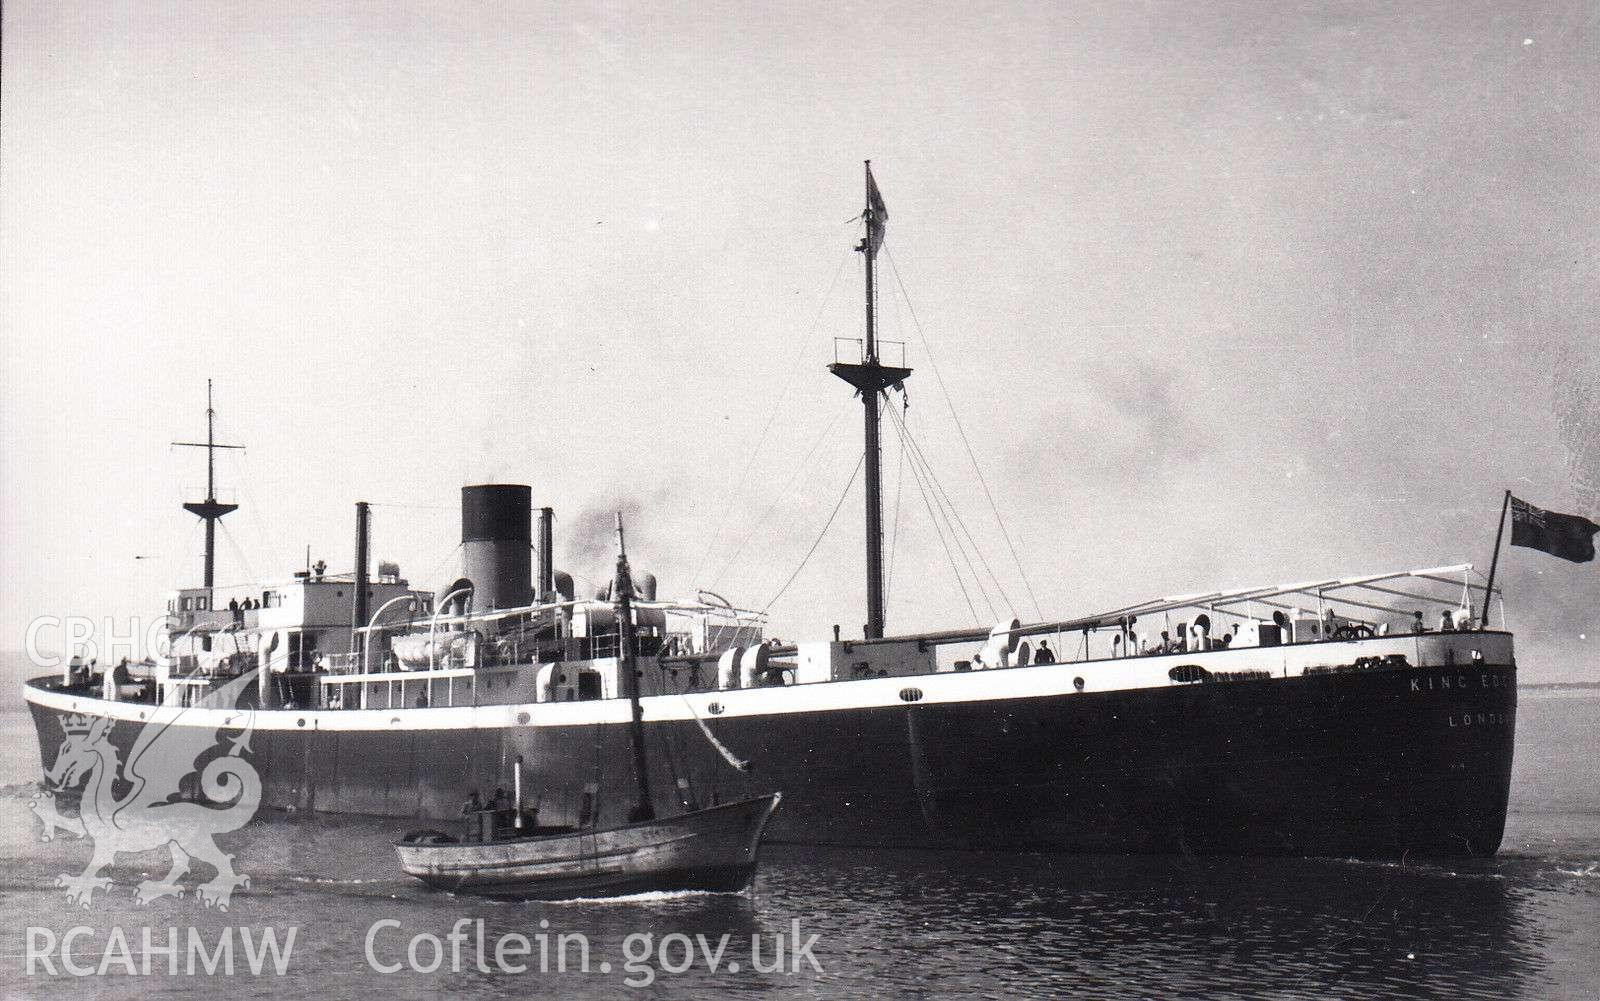 Photograph of 'The MV King Edgar, date unknown. Photo courtesy of N Chipchase (www.wreckstie.eu).' Included amongst material relating to desk based assessment of the MV King Edgar historic wreck site, conducted by Archaeology Wales, 2017.